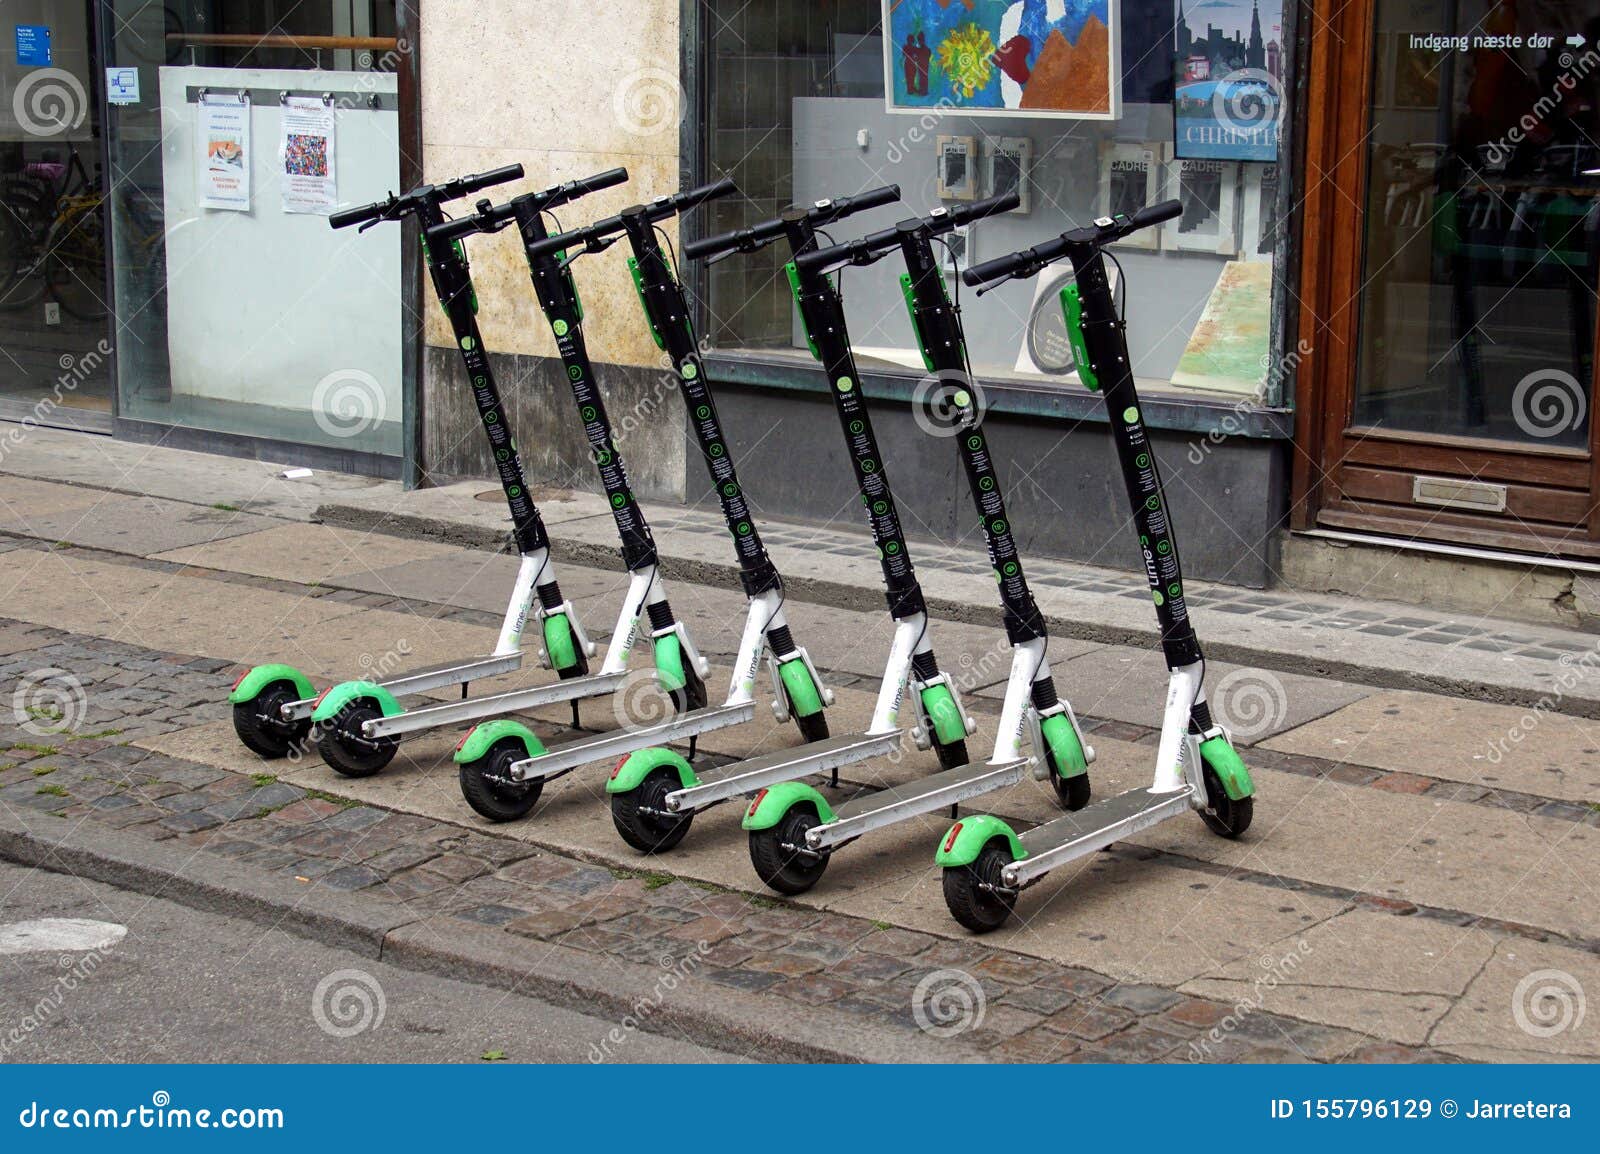 Lime S Electrical Scooter Rentals. Editorial Stock - Image of business, 155796129